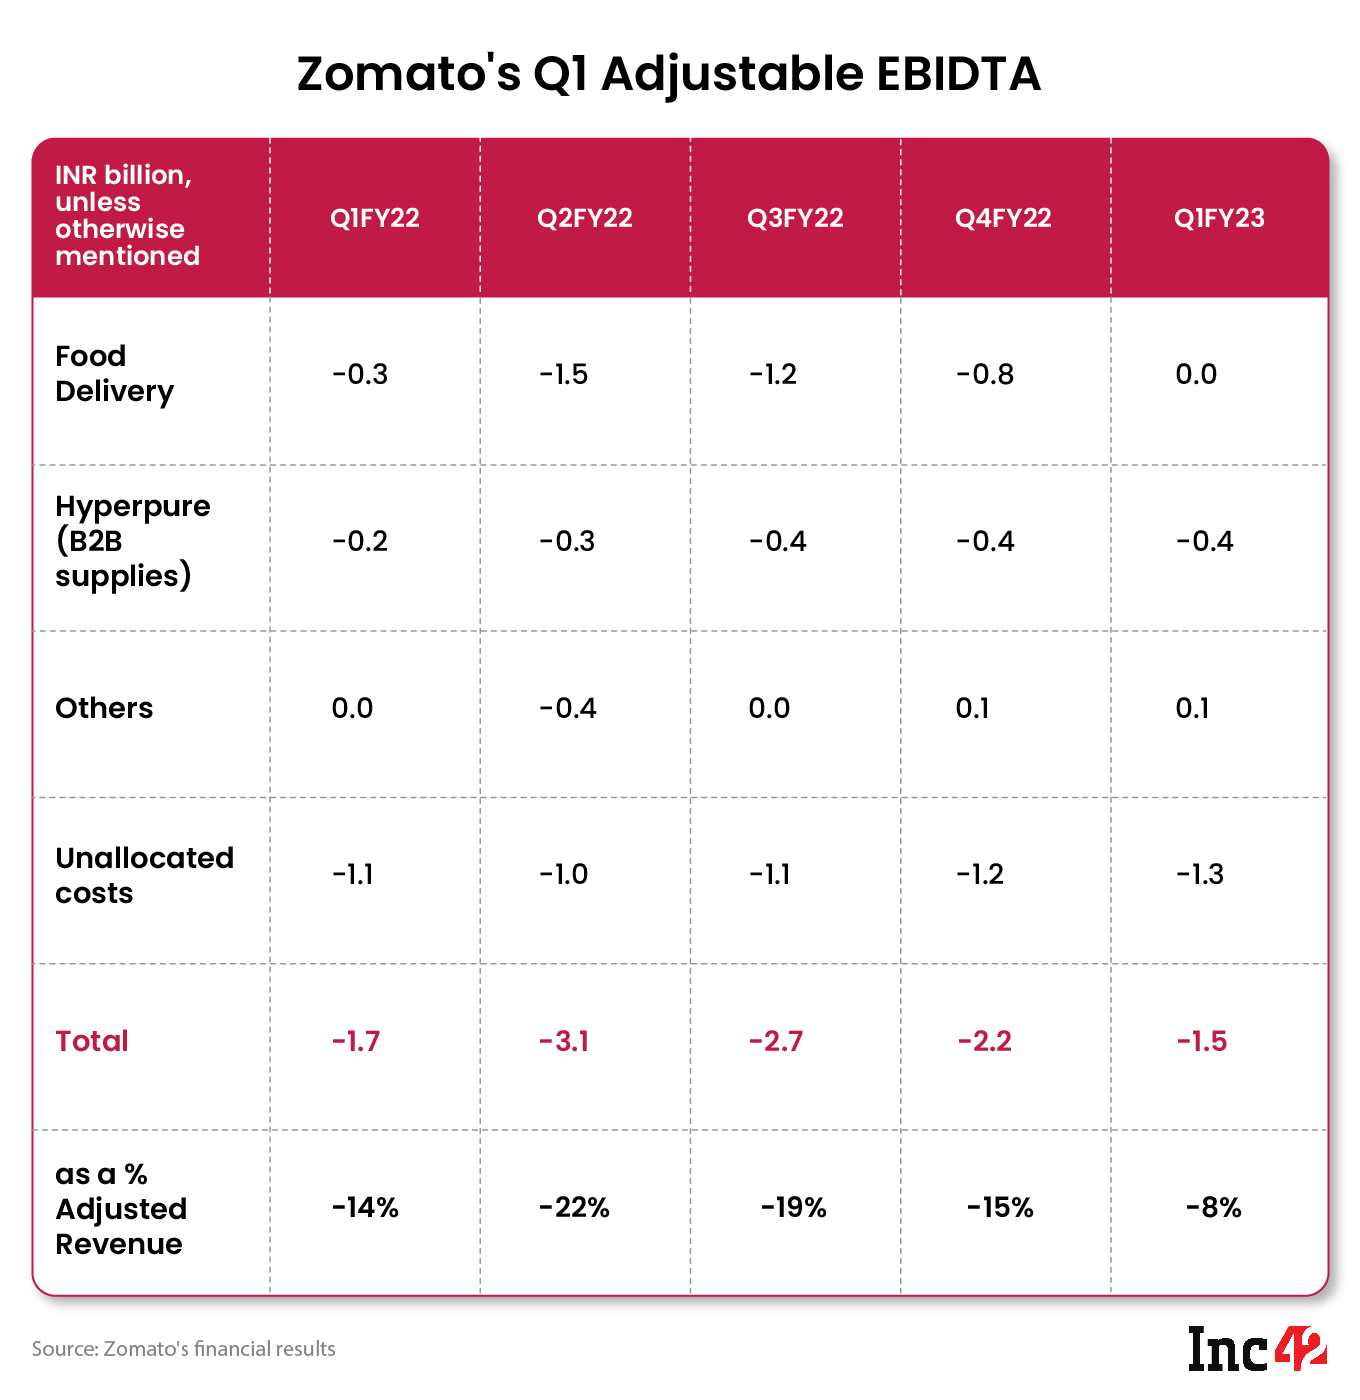 Zomato's food delivery business achieved break-even at adjusted EBITDA level